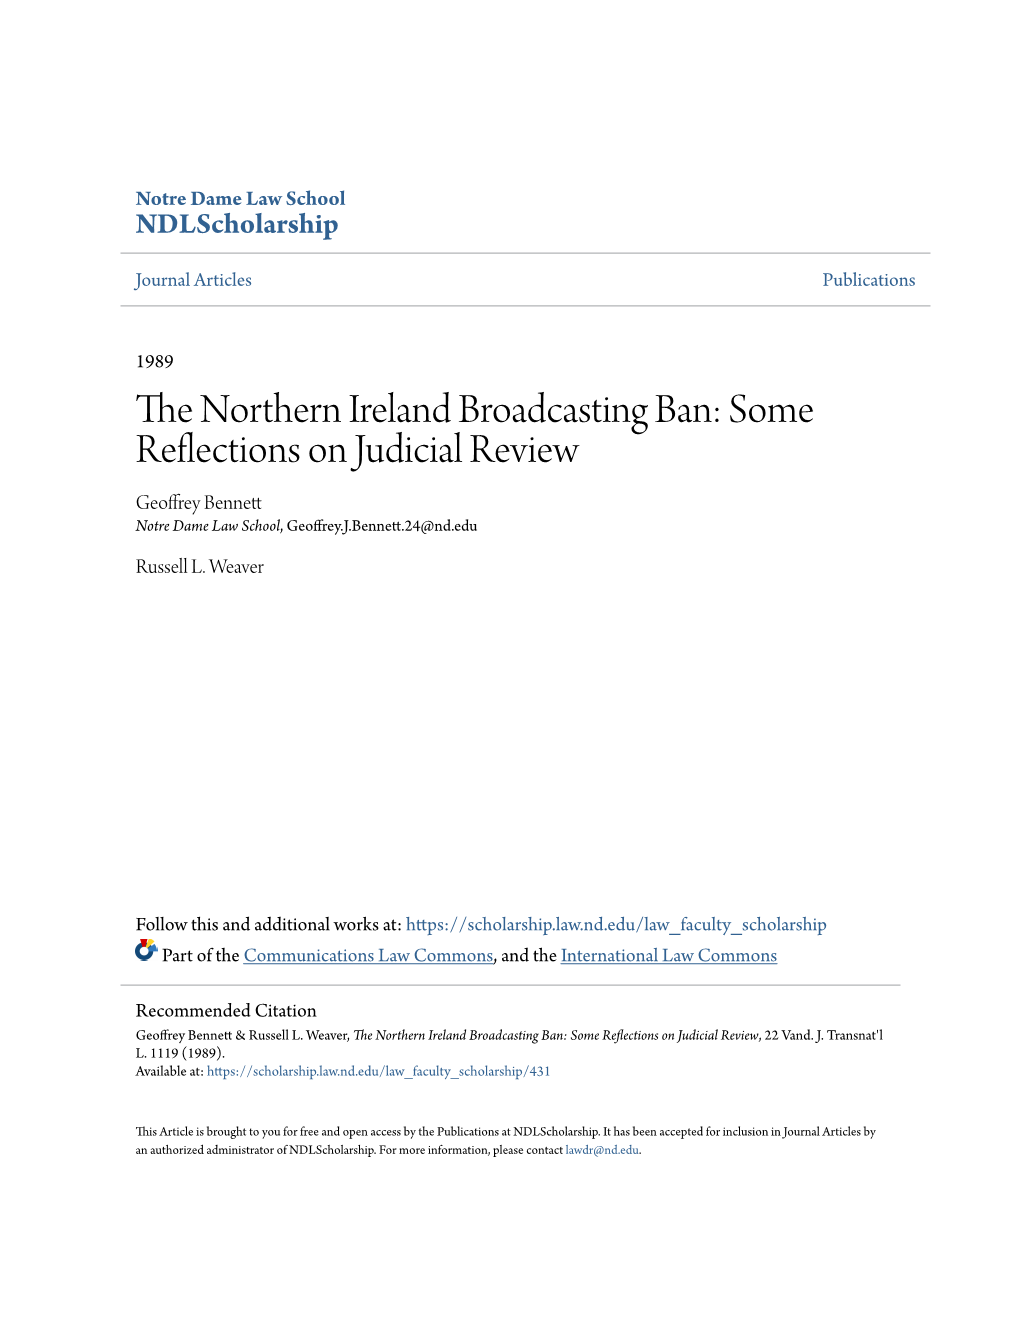 The Northern Ireland Broadcasting Ban: Some Reflections on Judicial Review, 22 Vand